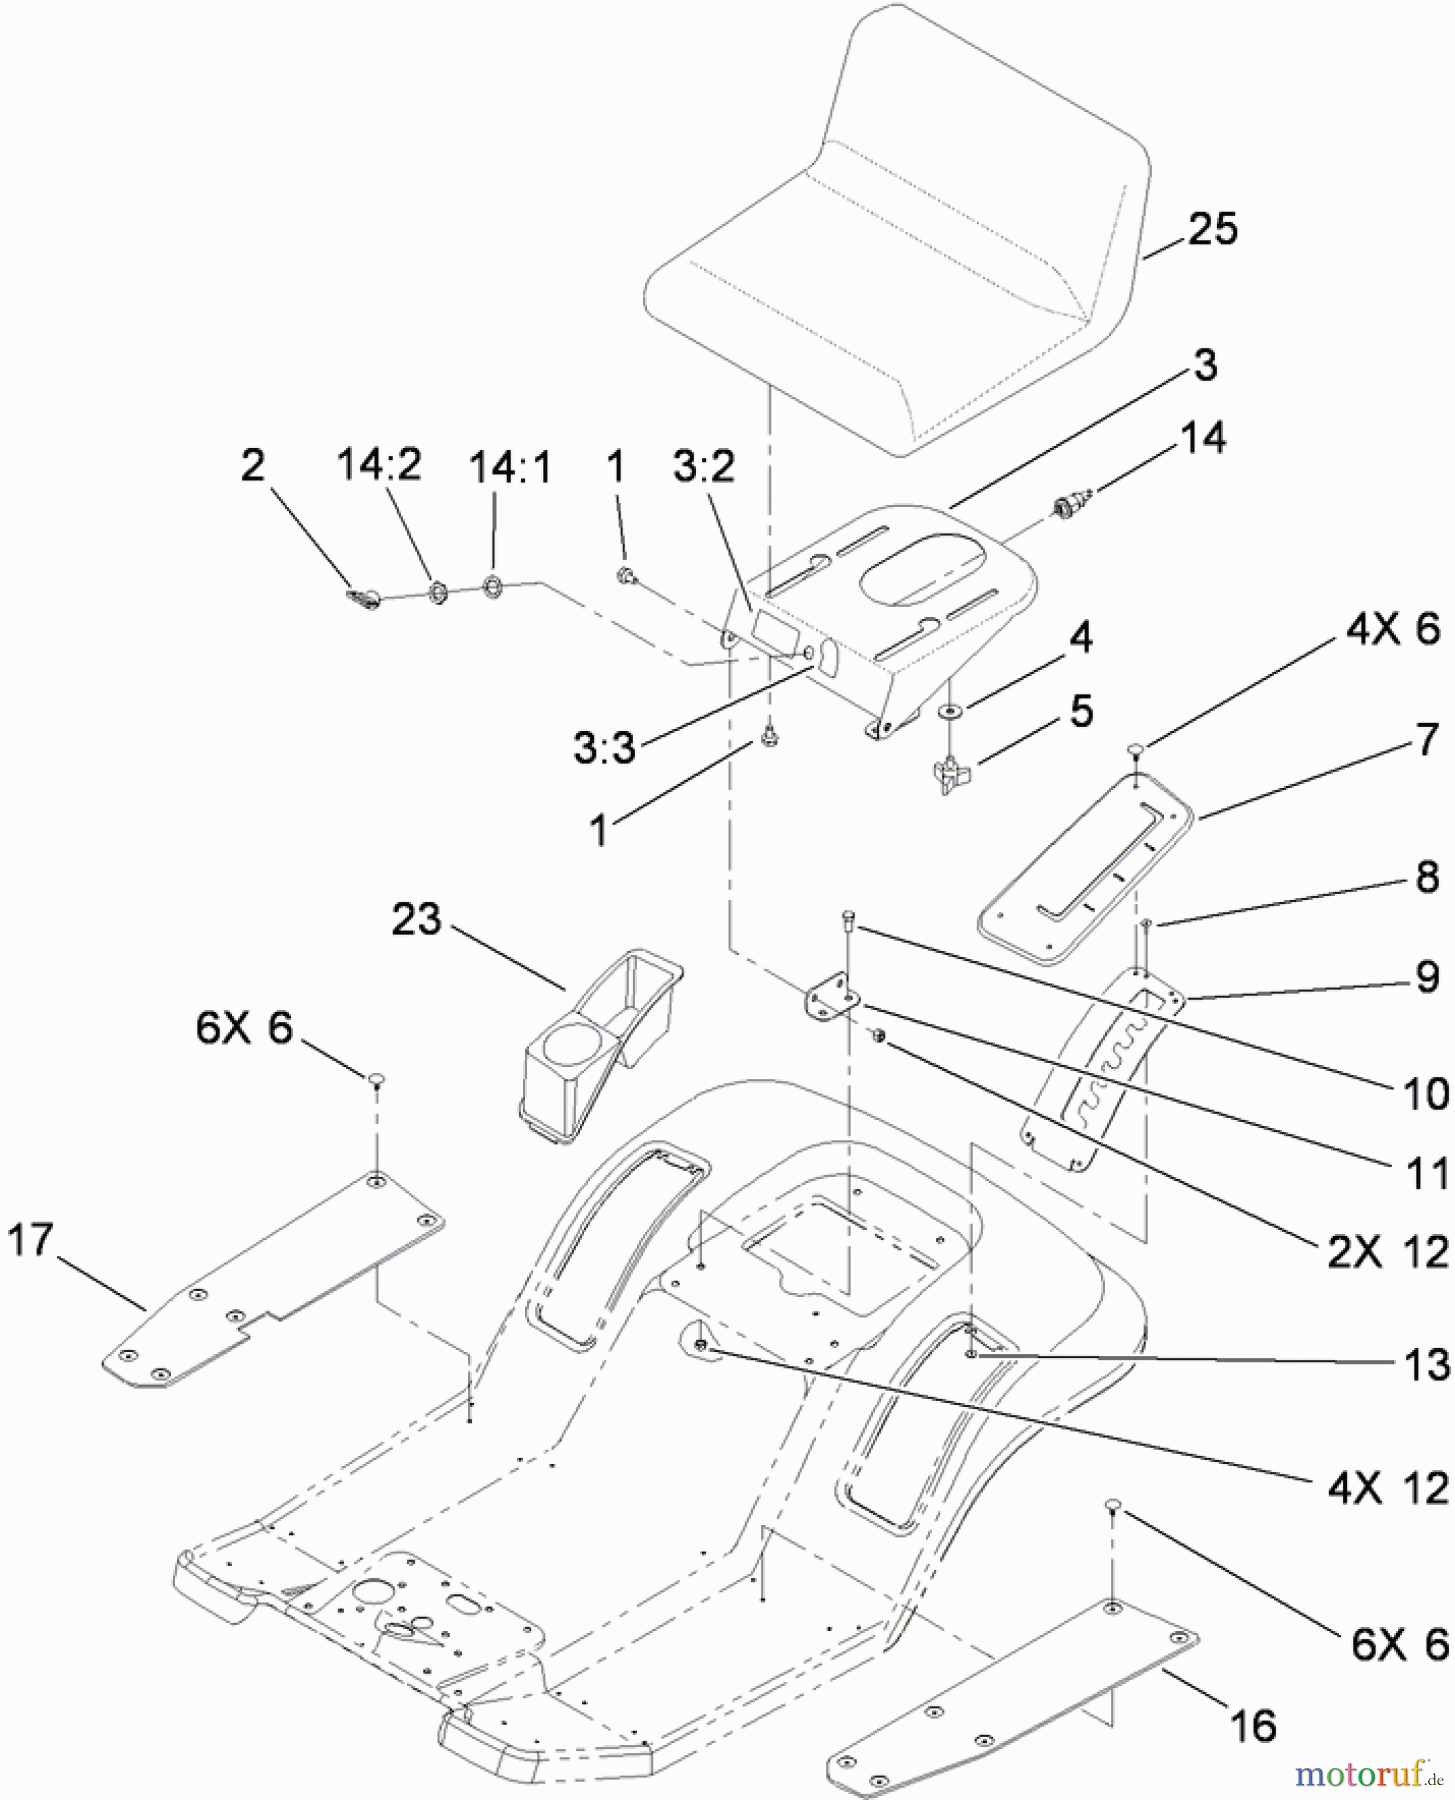  Toro Neu Mowers, Lawn & Garden Tractor Seite 1 71252 (XL 380H) - Toro XL 380H Lawn Tractor, 2010 (310002001-310999999) REAR BODY AND SEAT ASSEMBLY